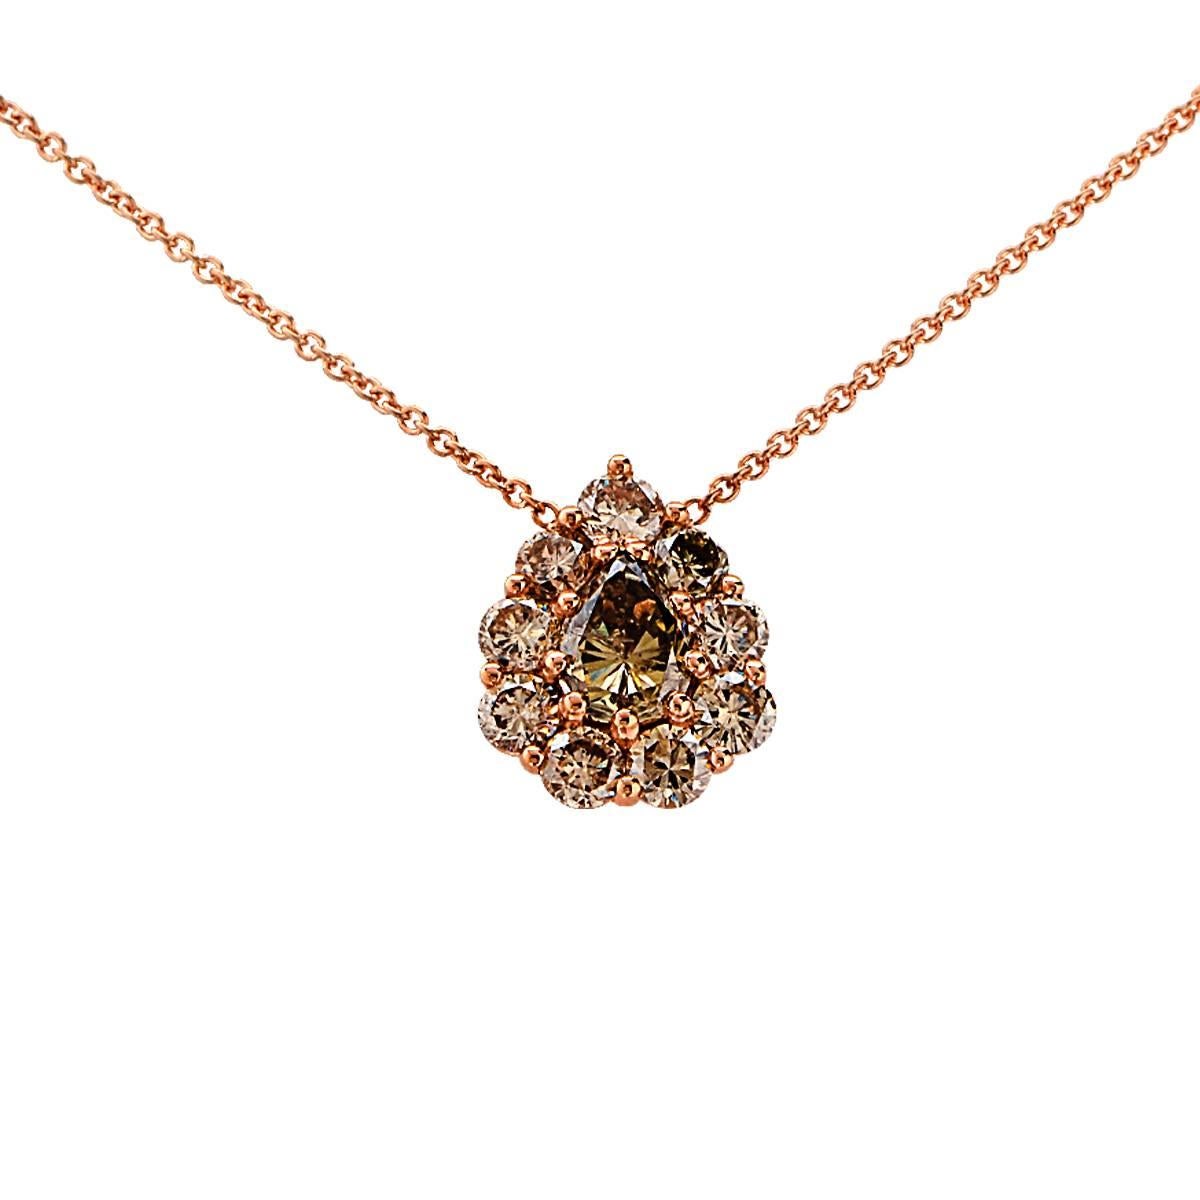 Gorgeous Fancy Cognac Colored Diamond Necklace Featuring 14 Mix Cut Fancy Colored Diamonds Set in 18 Karat Rose Gold. Length of Necklace is 16